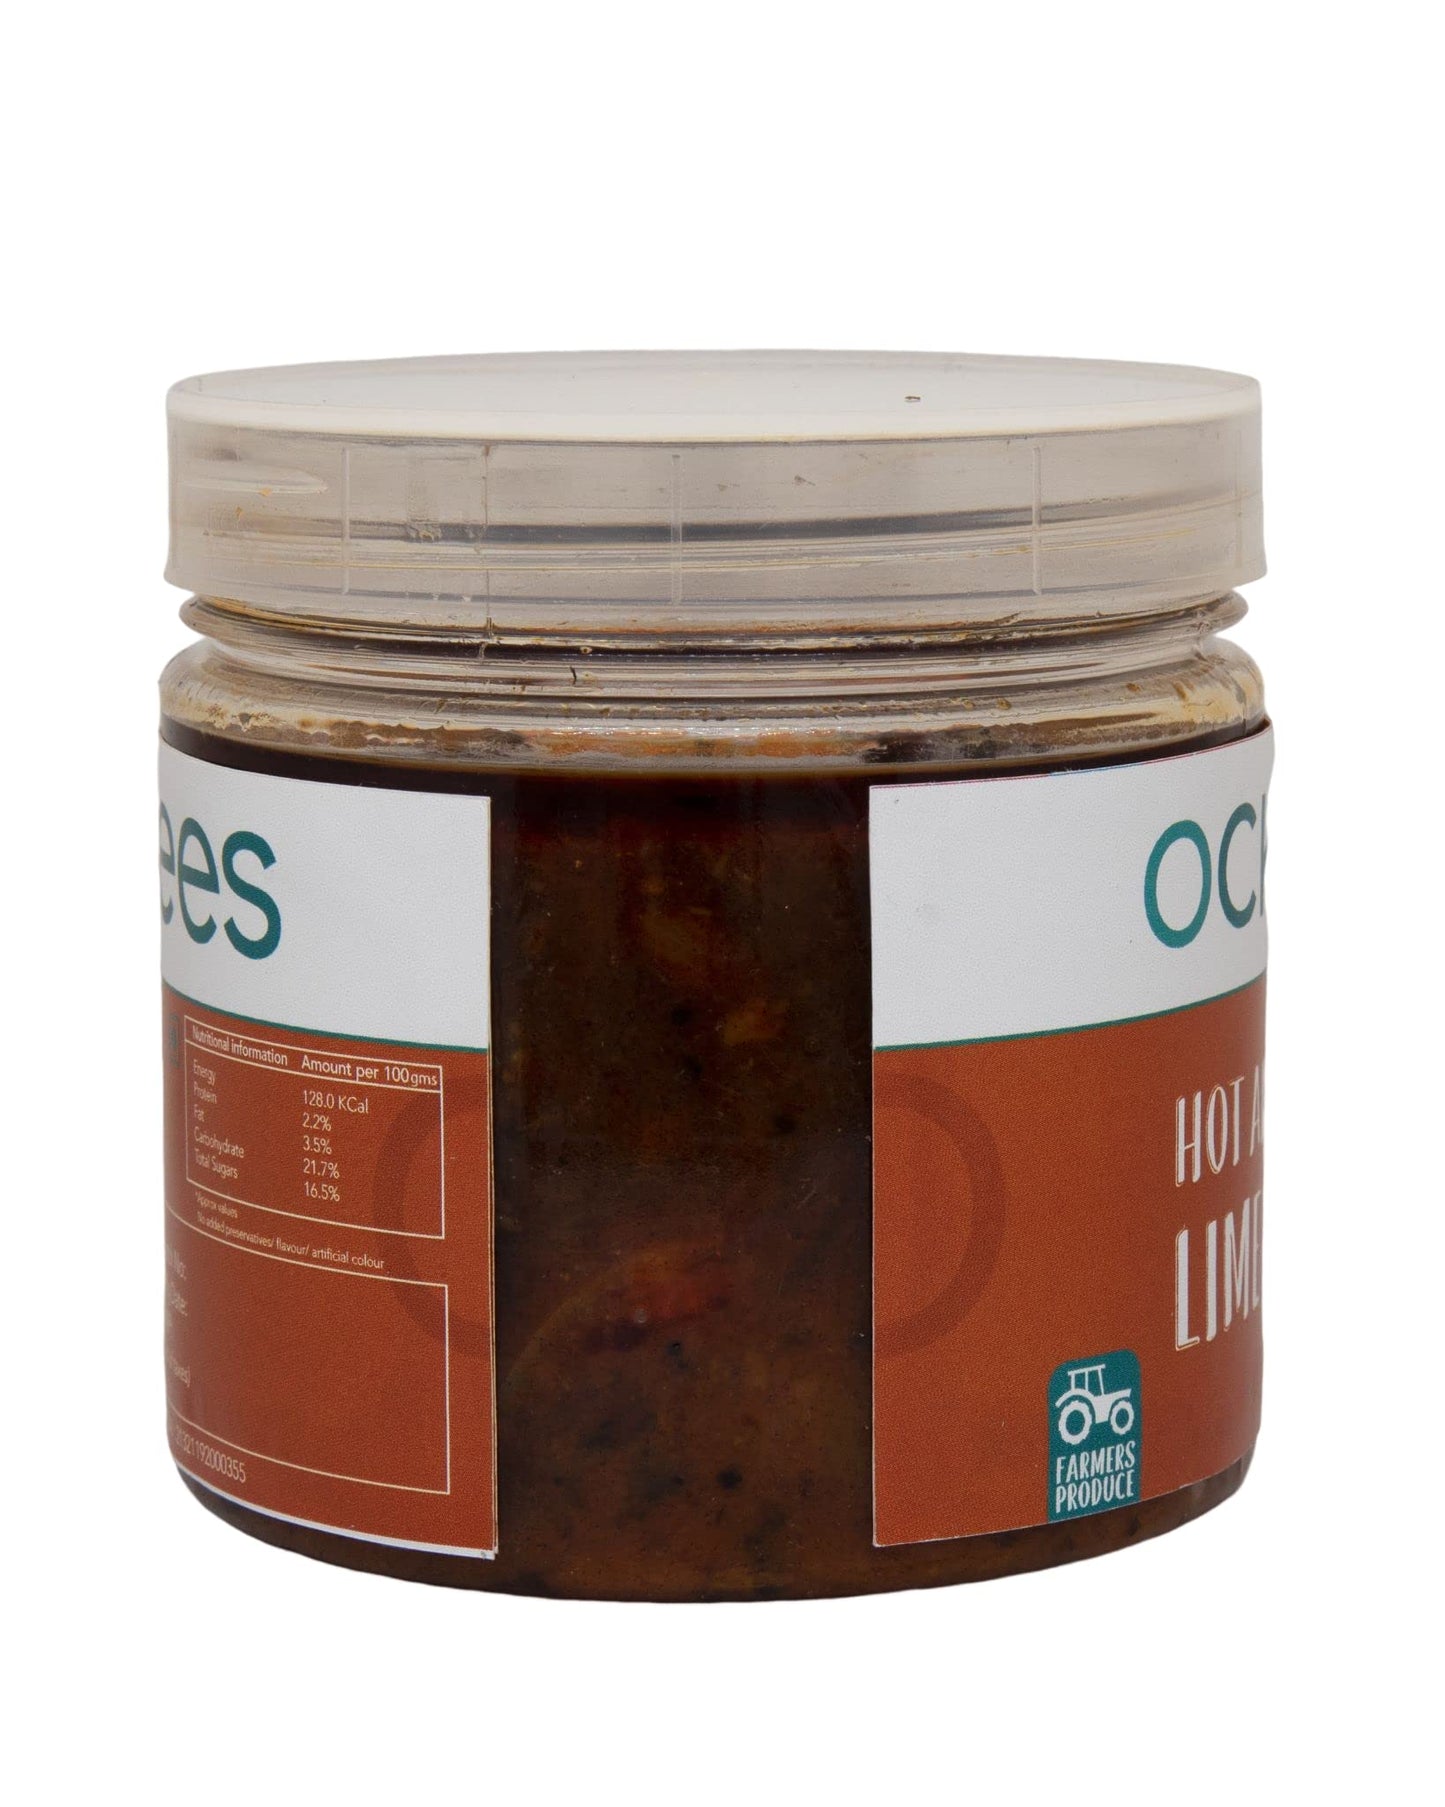 OCHEES Hot and Sweet Lime Pickle 350g | Traditional Mixed Pickle | No preservatives | Rich in taste  - 350 grm